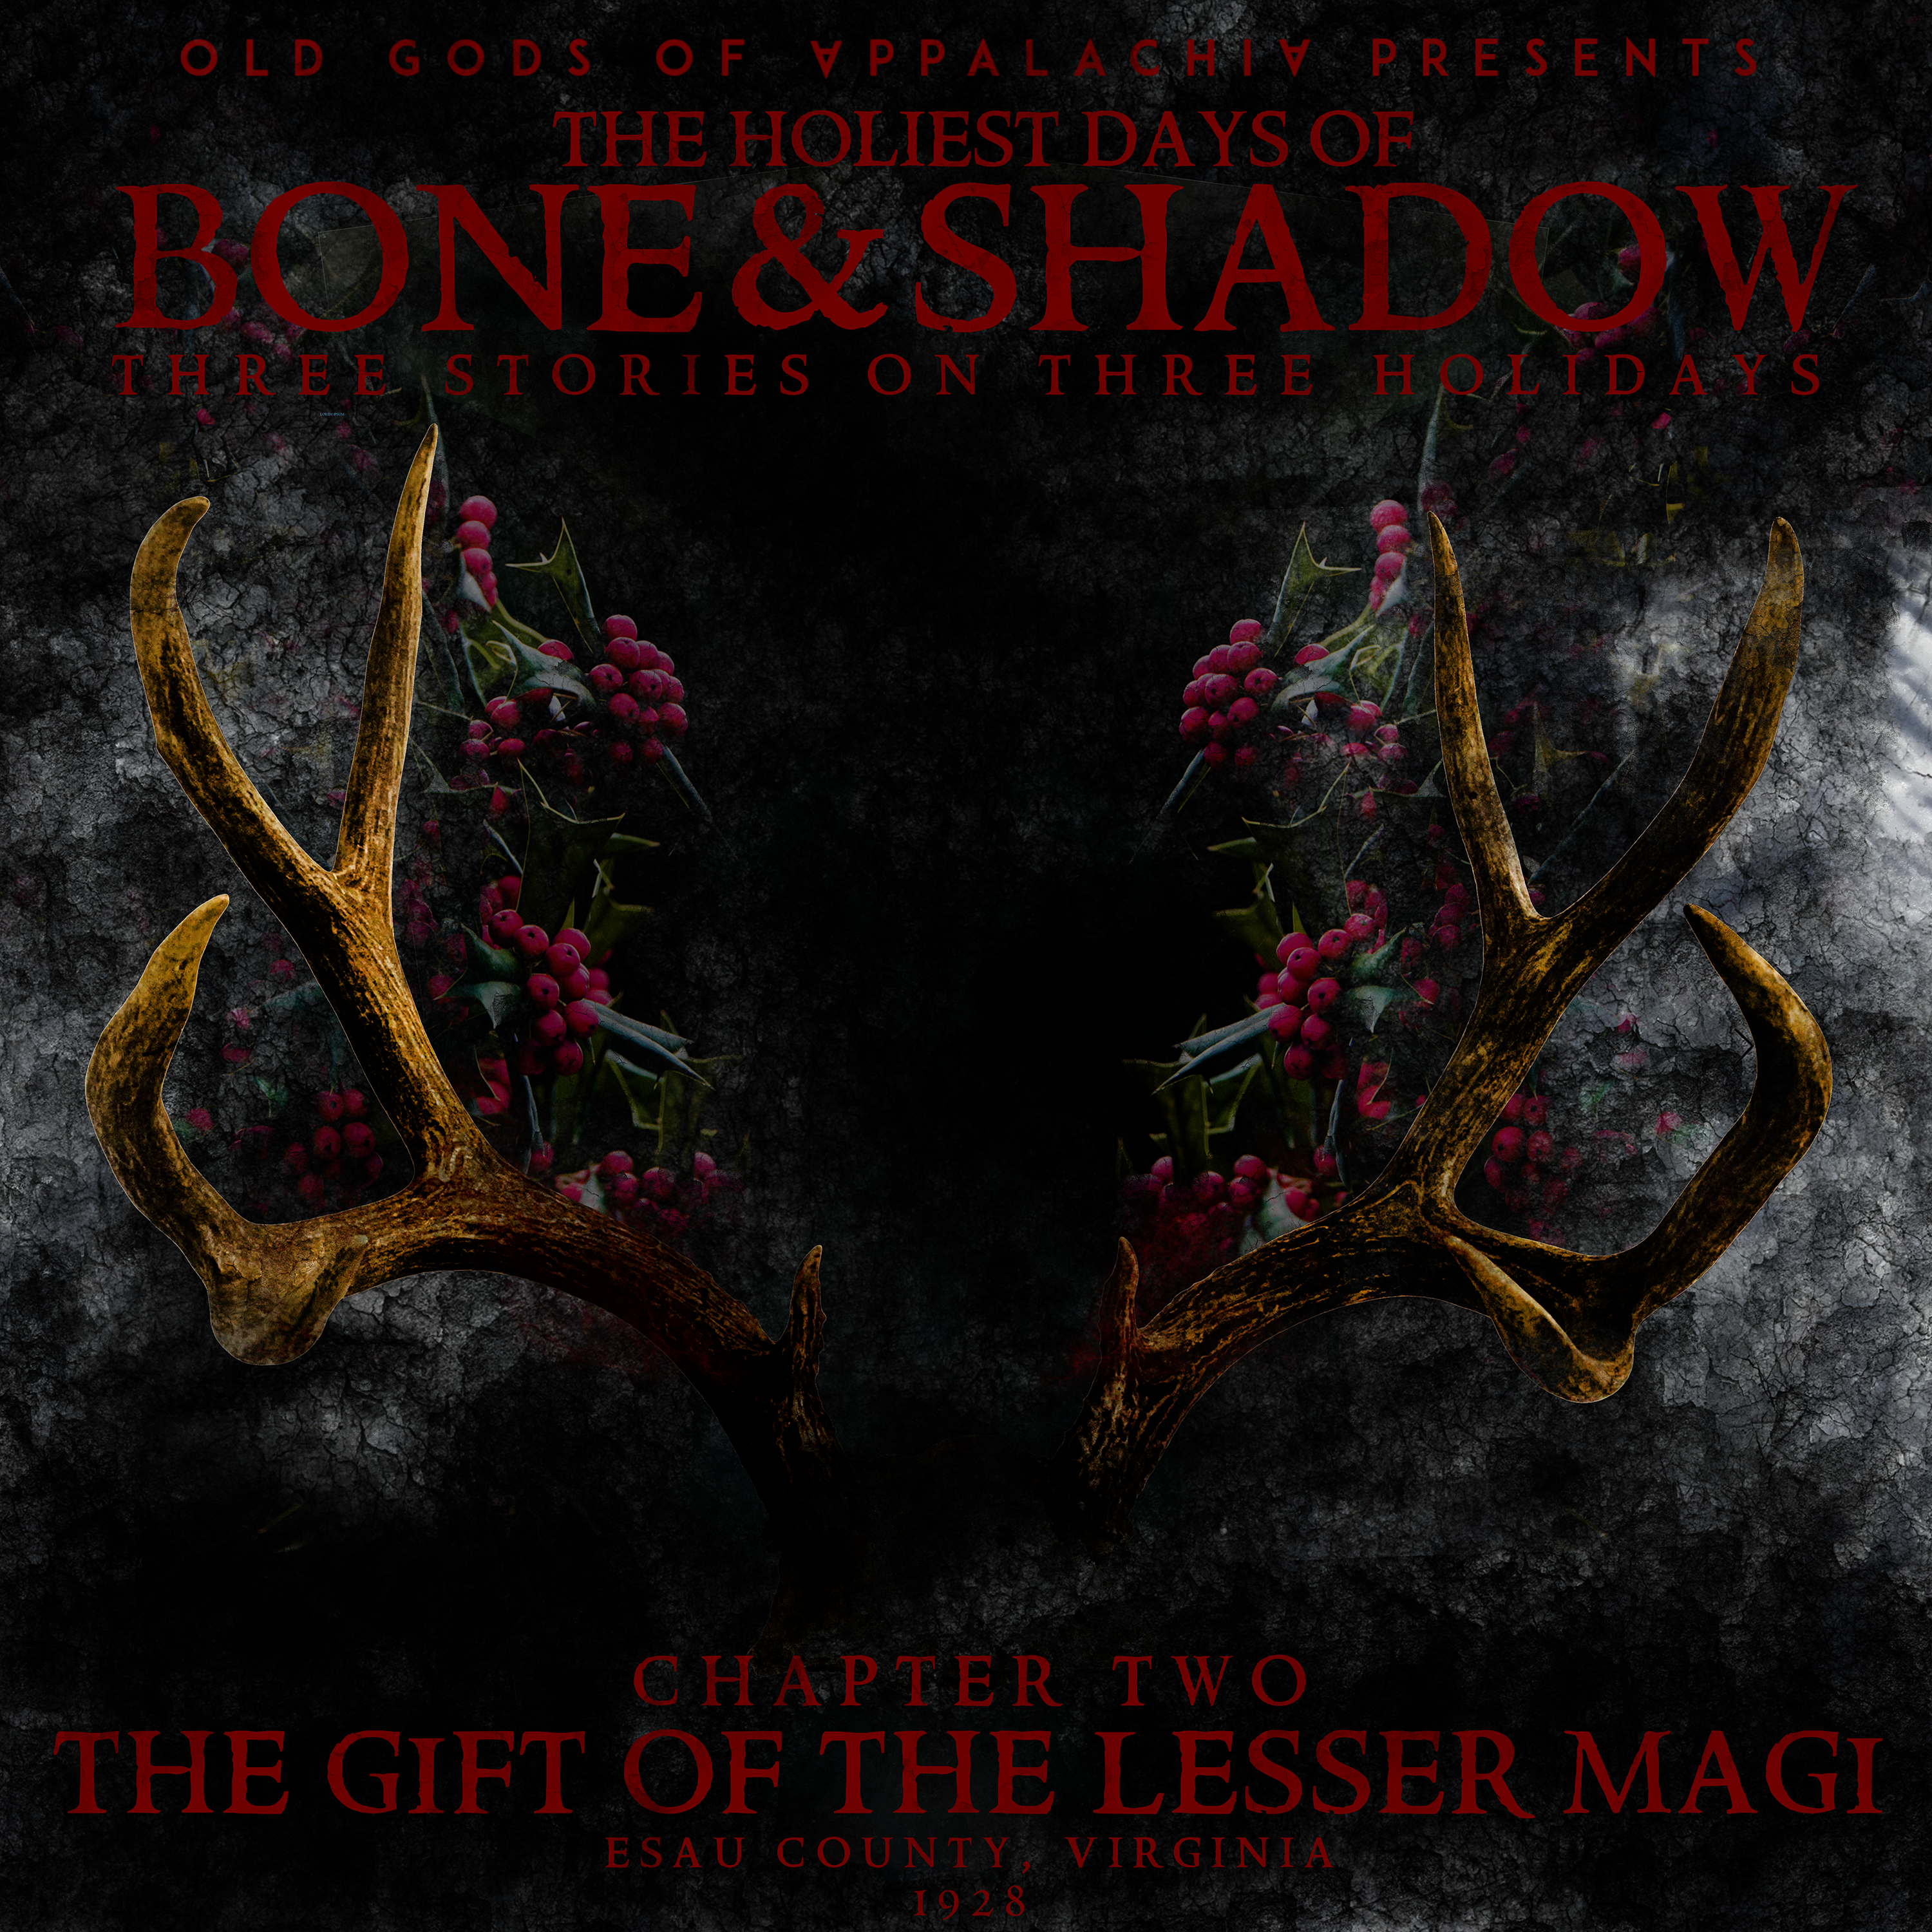 The Holiest Days of Bone and Shadow, Chapter Two: The Gift of the Lesser Magi